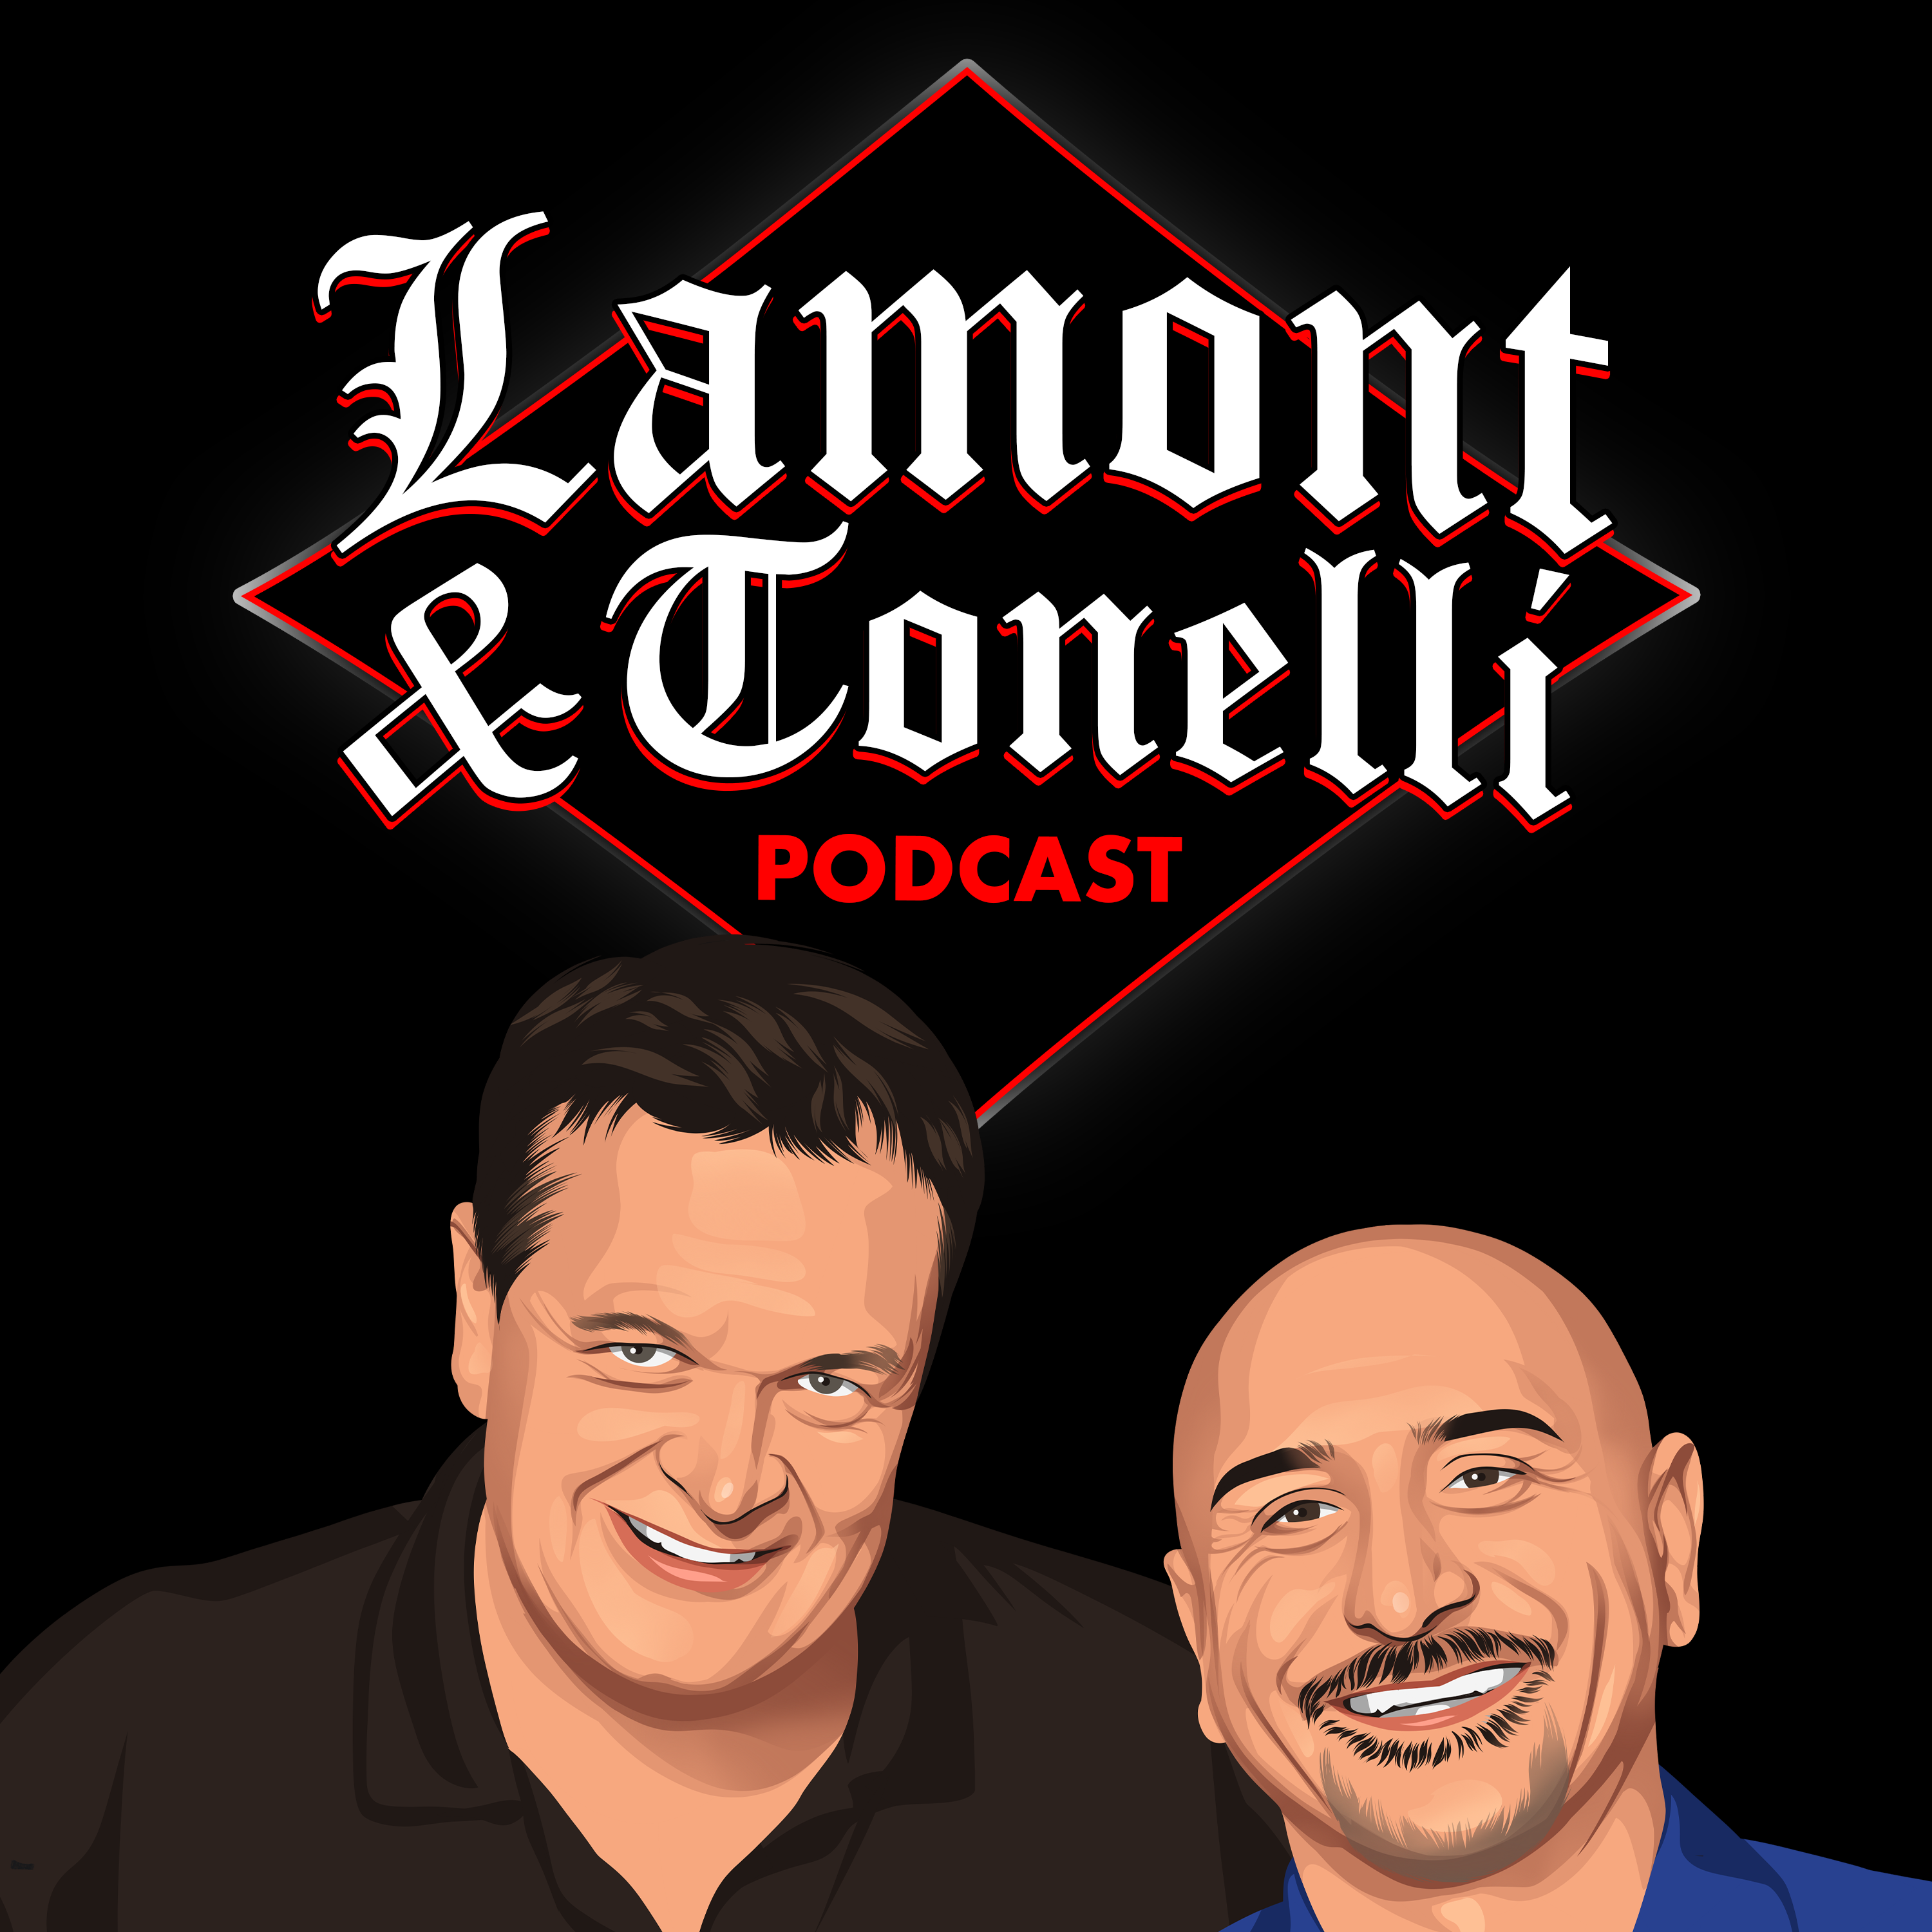 Lamont & Tonelli Talk About The Stanley Cup Lawsuit With Skeeter's Mom